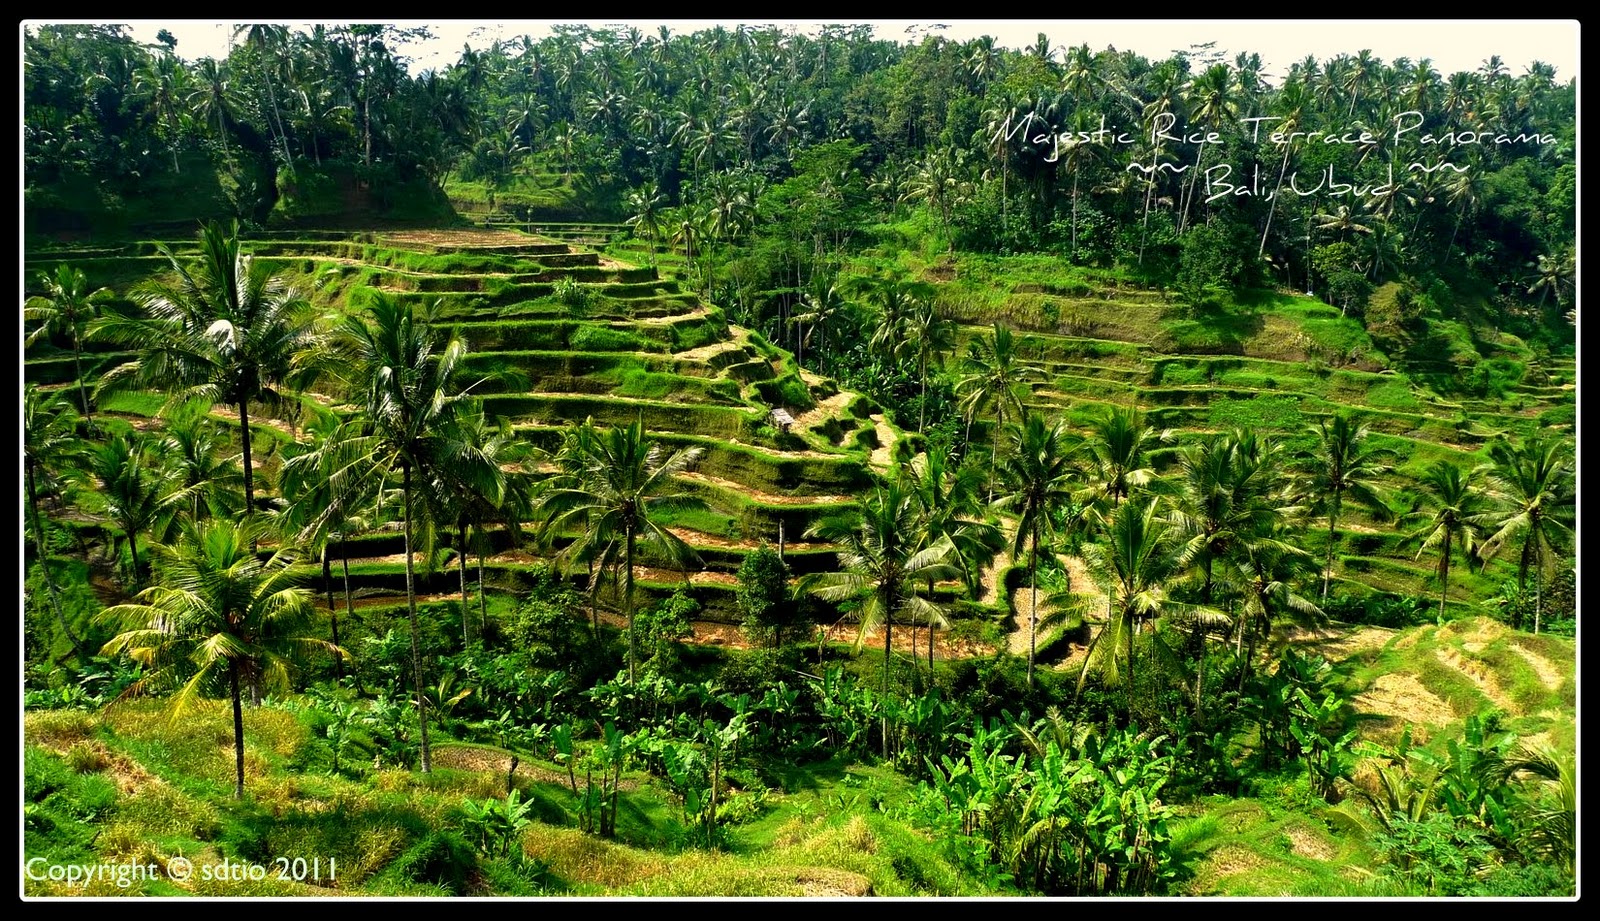 Download this Ubud Really Phenomenal... picture